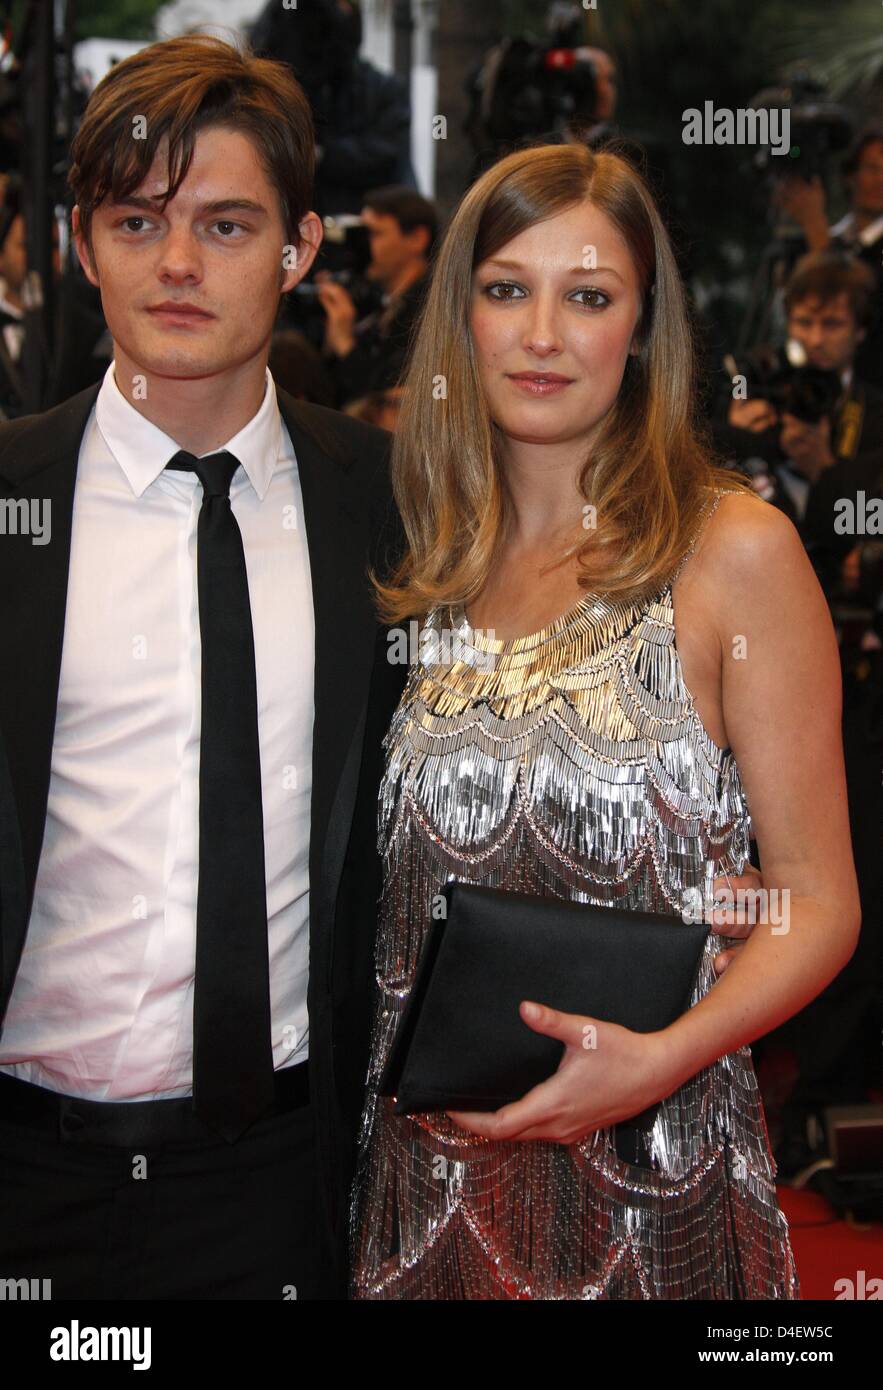 US actor Sam Riley and German actress Alexandra Maria Lara arrive at the premiere of 'The Exchange' at the Palais des Festivals at the 61st Cannes Film Festival in Cannes, France, 20 May 2008. Photo: Hubert Boesl Stock Photo